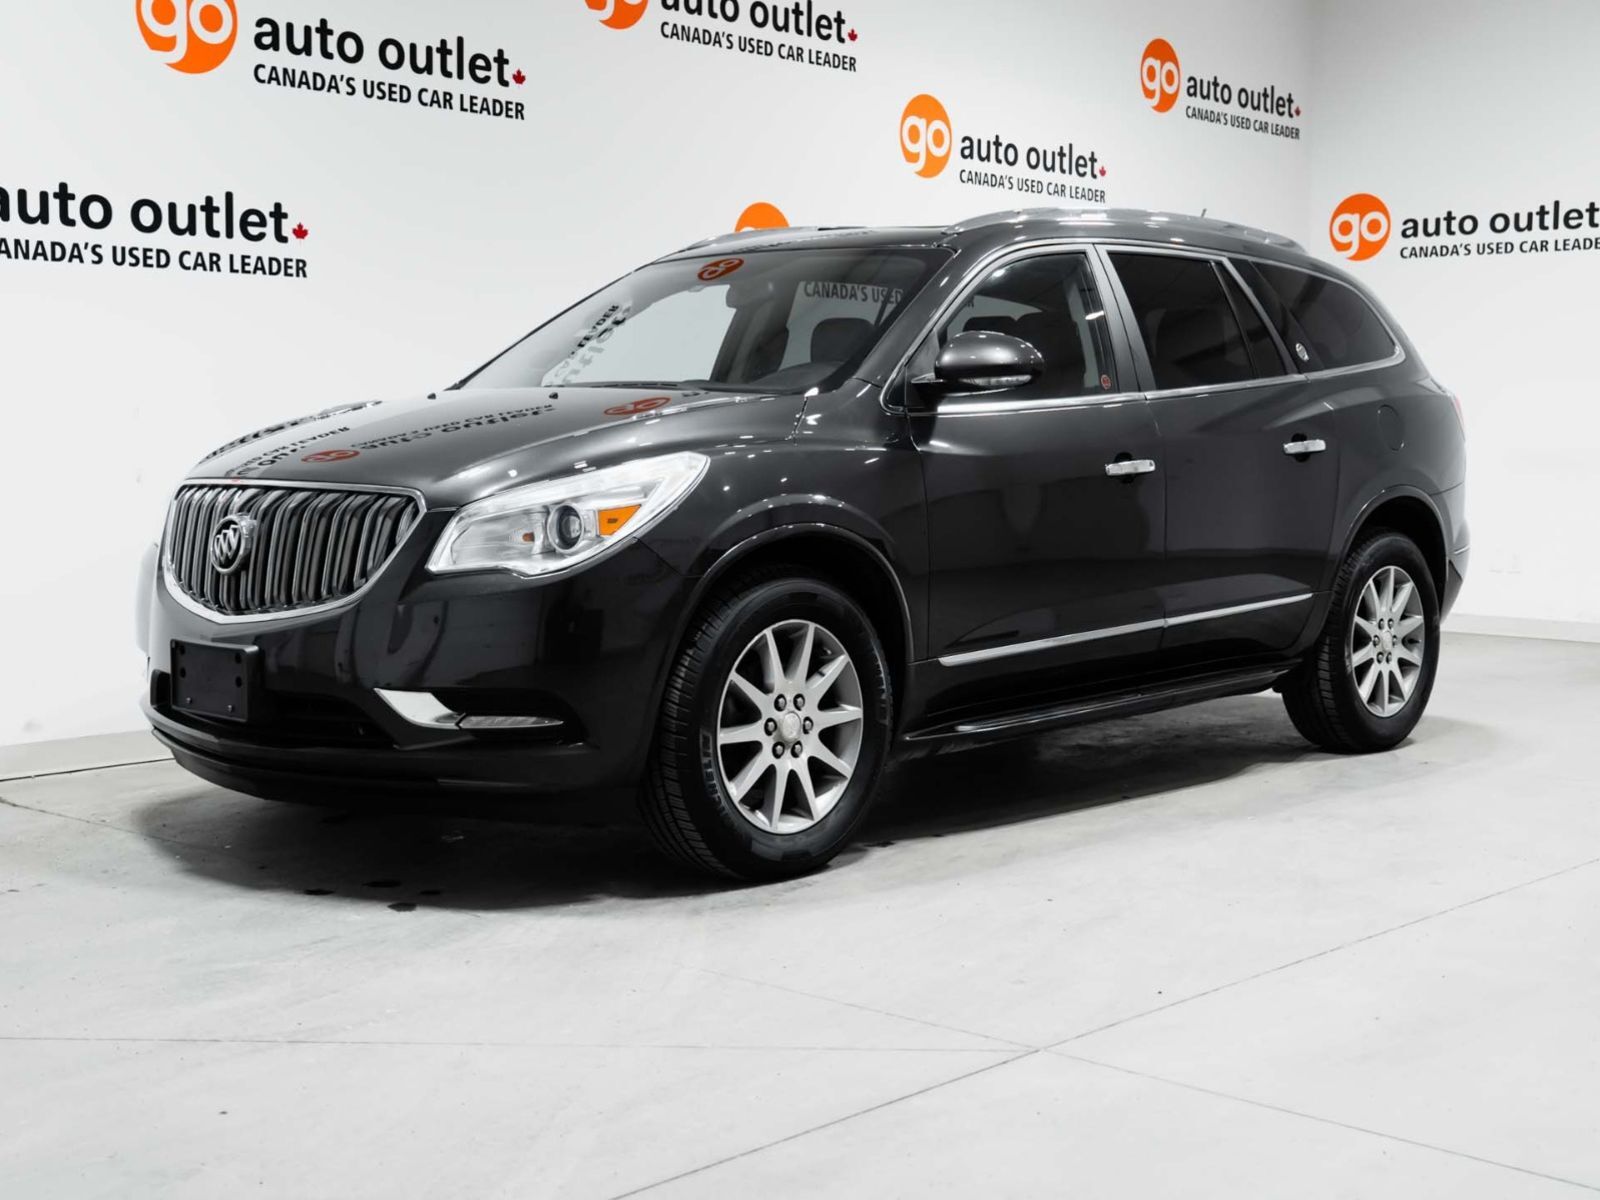 2015 Buick Enclave Leather 3.6L AWD Htd Seats Sunroof Navi SXM